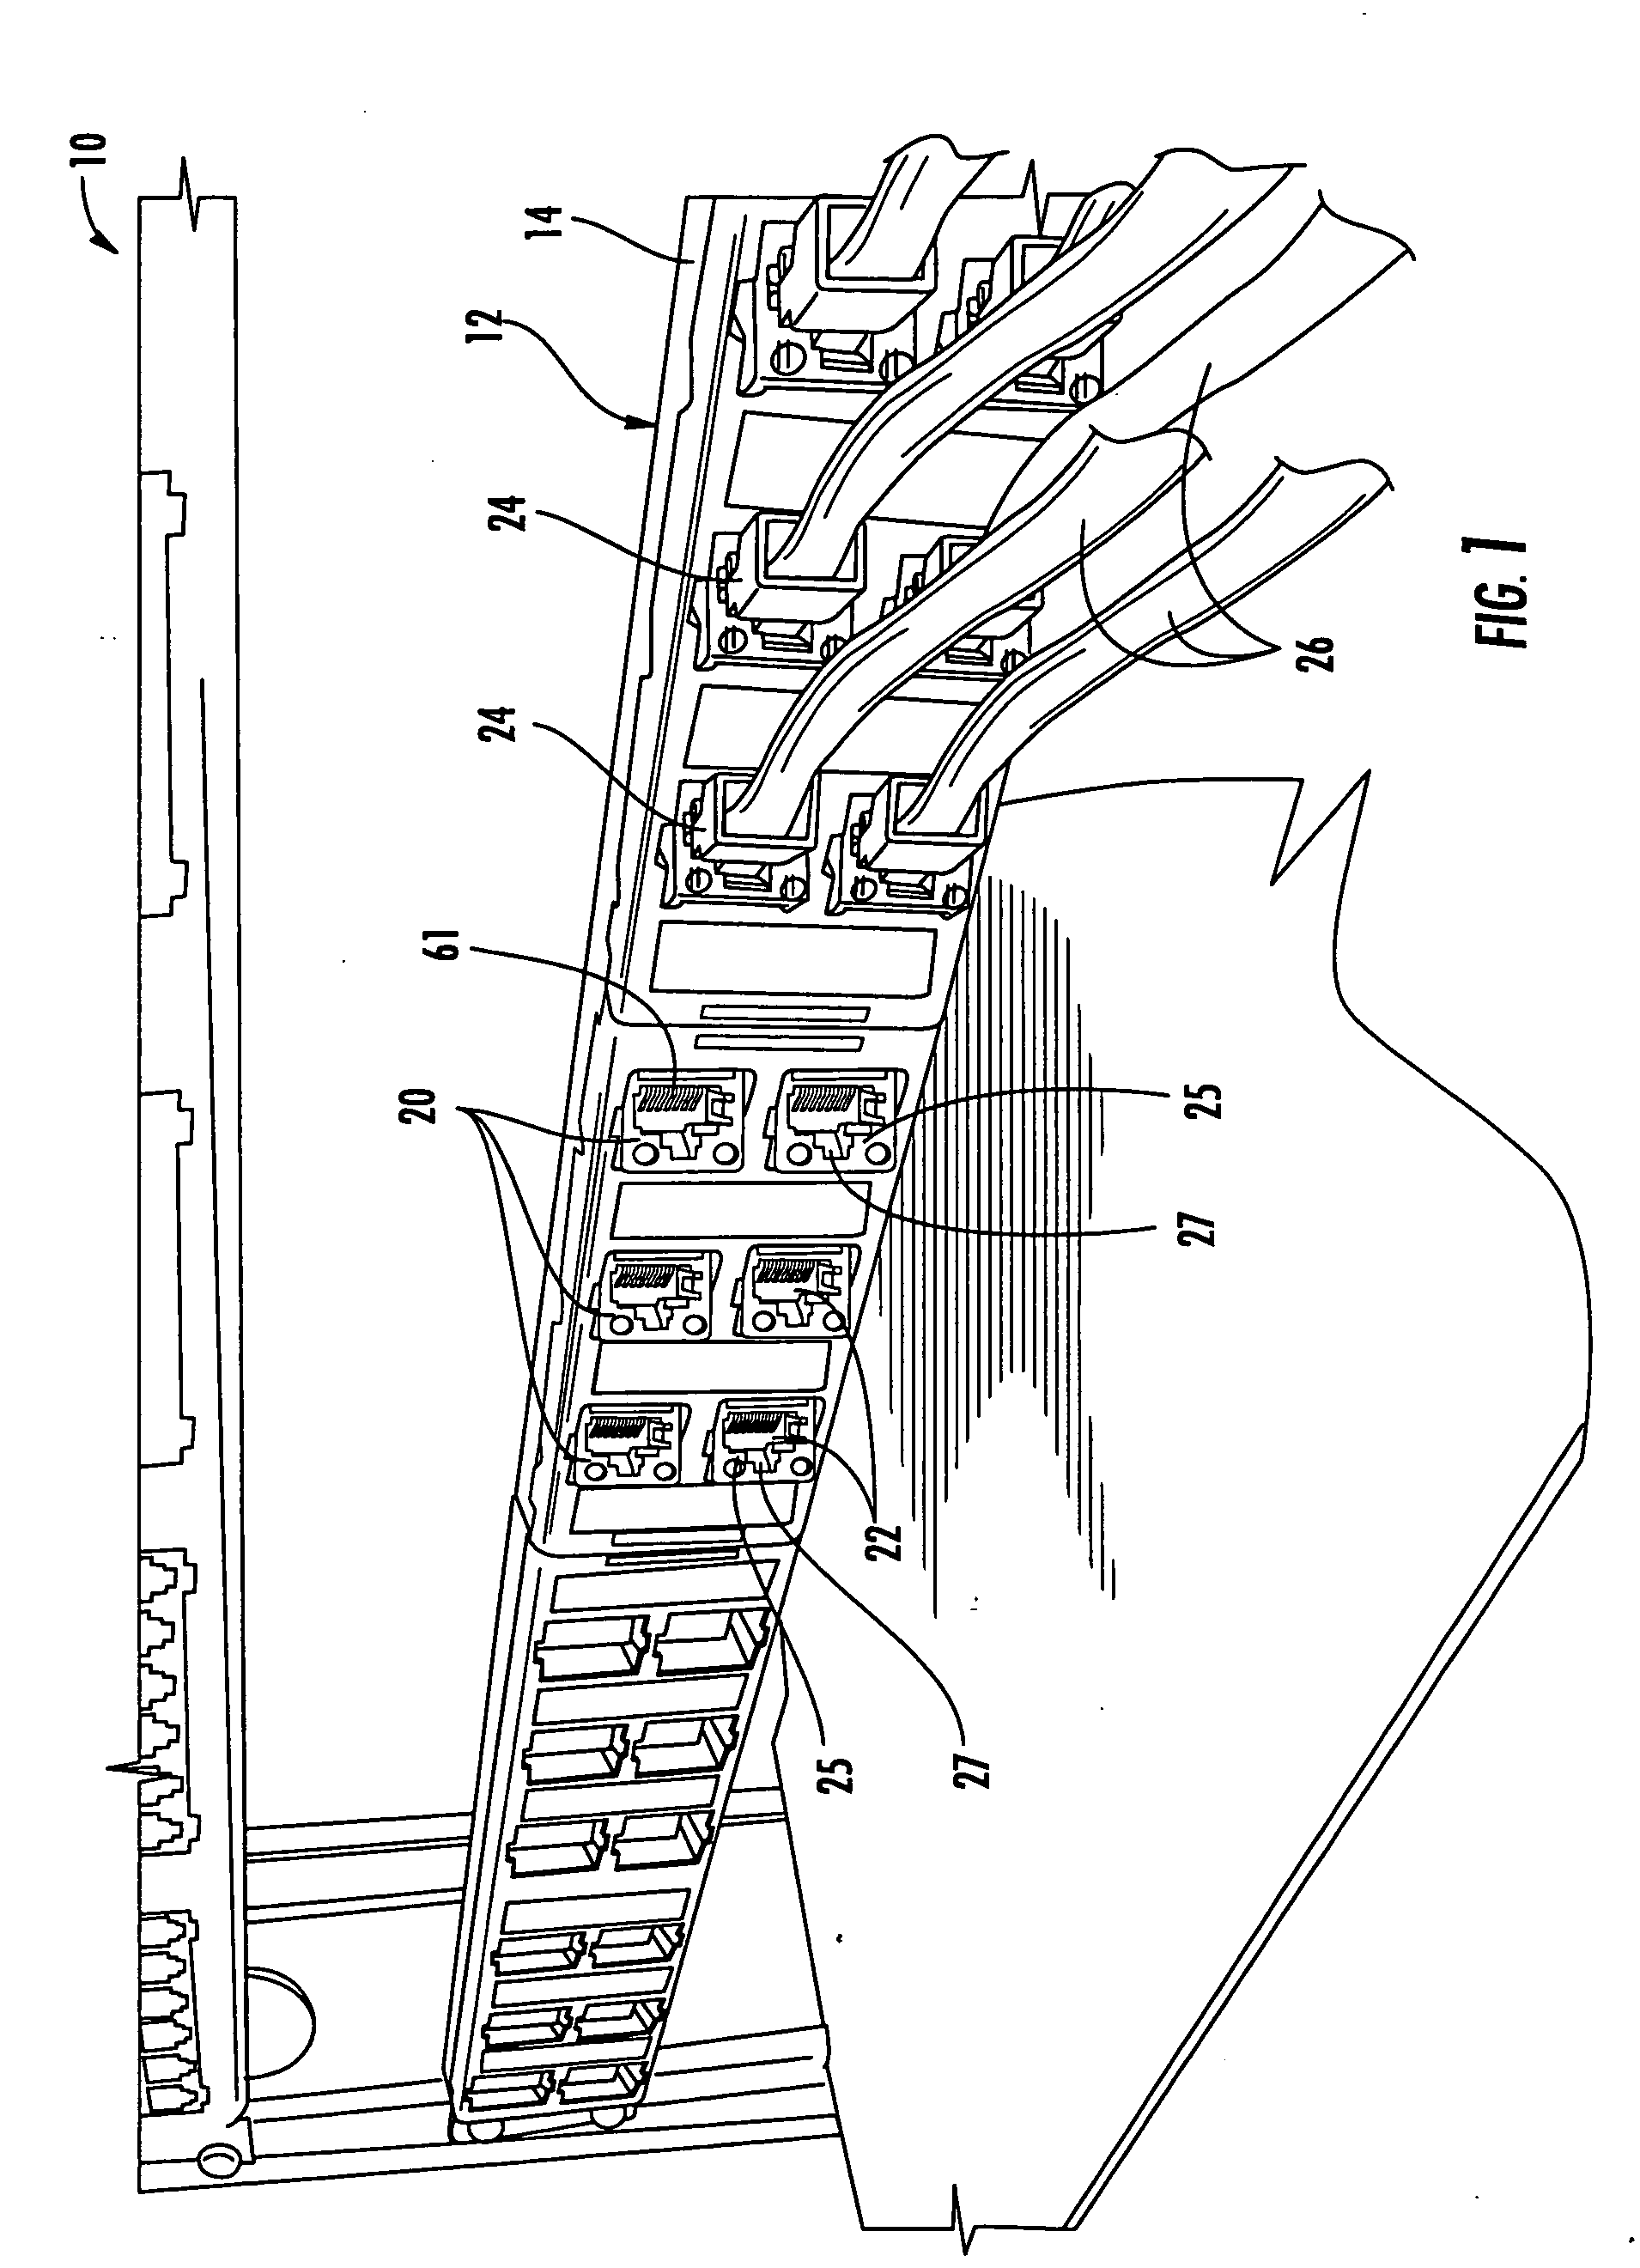 Patch panels with communications connectors that are rotatable about a vertical axis